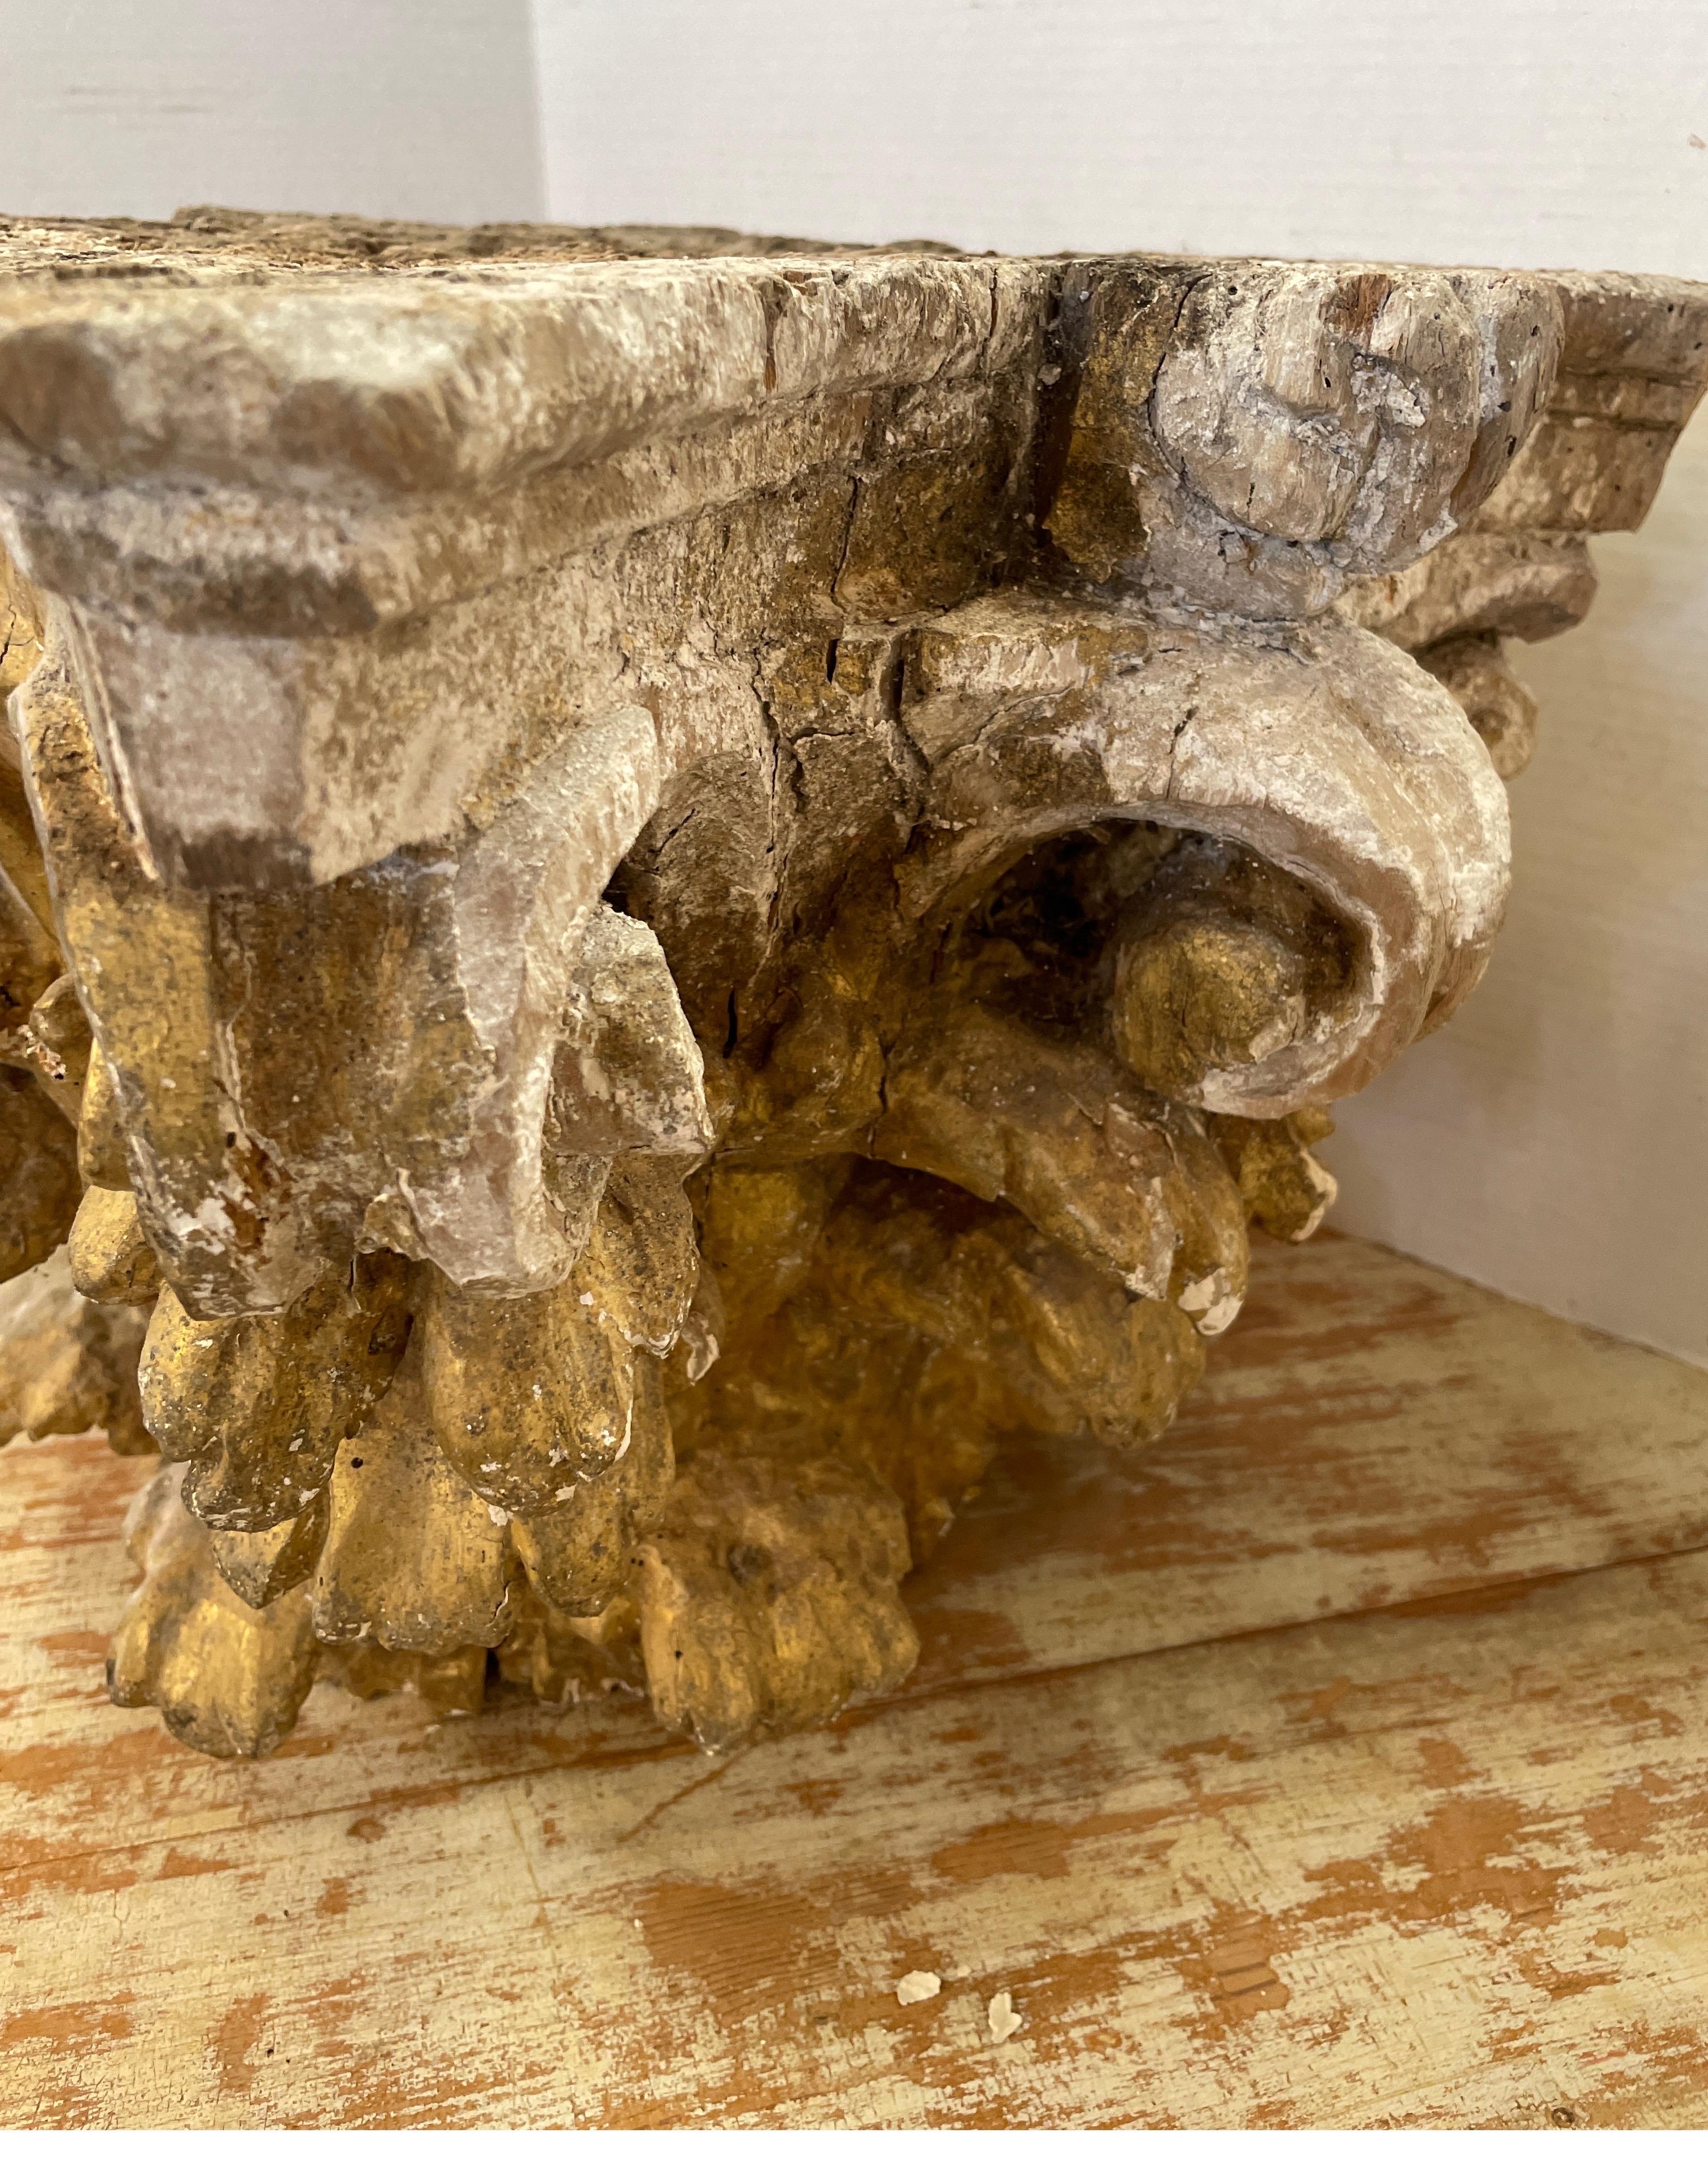 This is a nice size capital from Italy. Normally these were top a column inside cathedrals throughout the world. It’s beautifully hand carved by an artesian out of wood. The gold gilt finished is from the original patina. It makes for a great